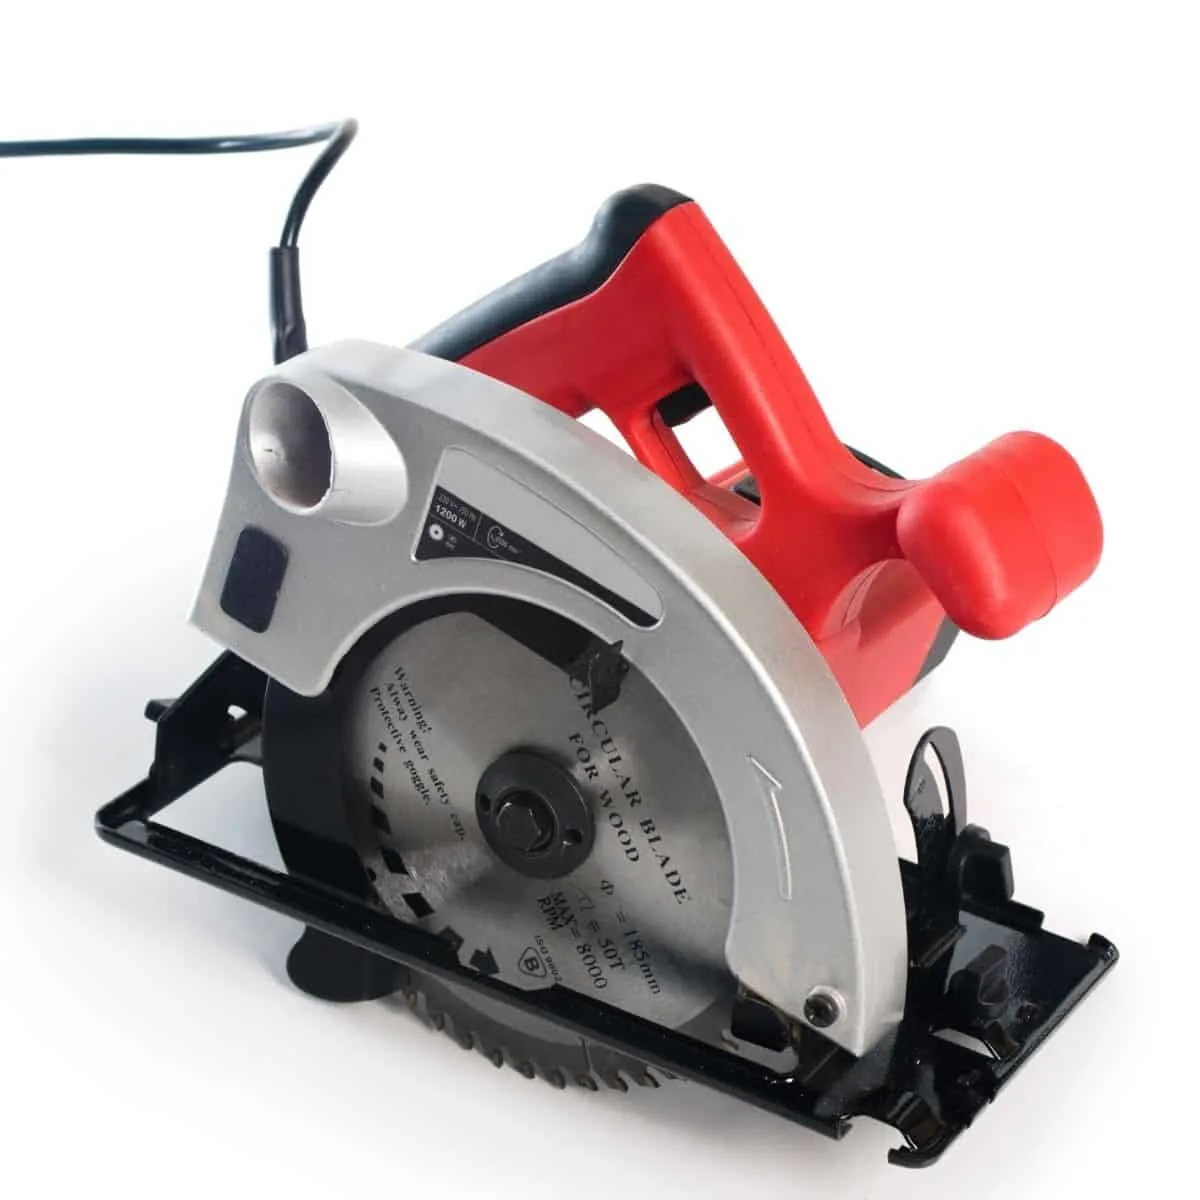 circular saw with red handle